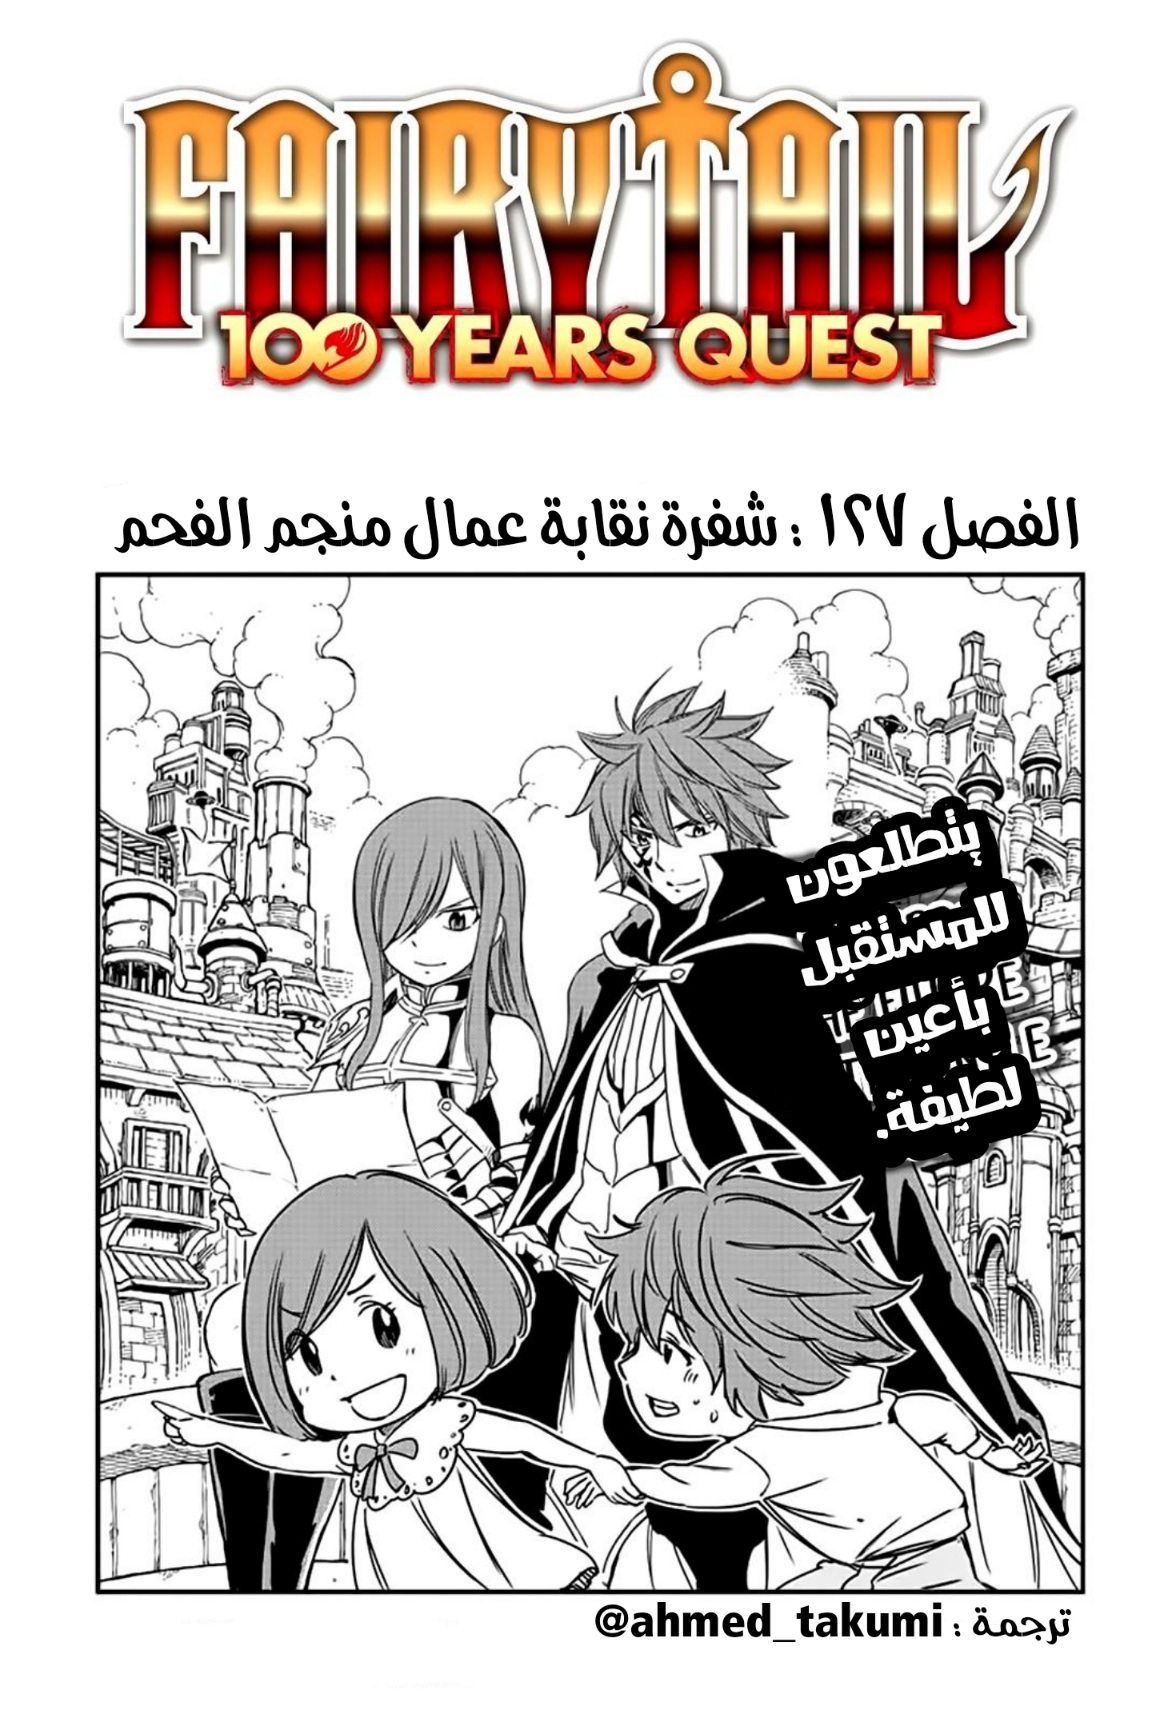 Fairy Tail 100 Years Quest: Chapter 127 - Page 1